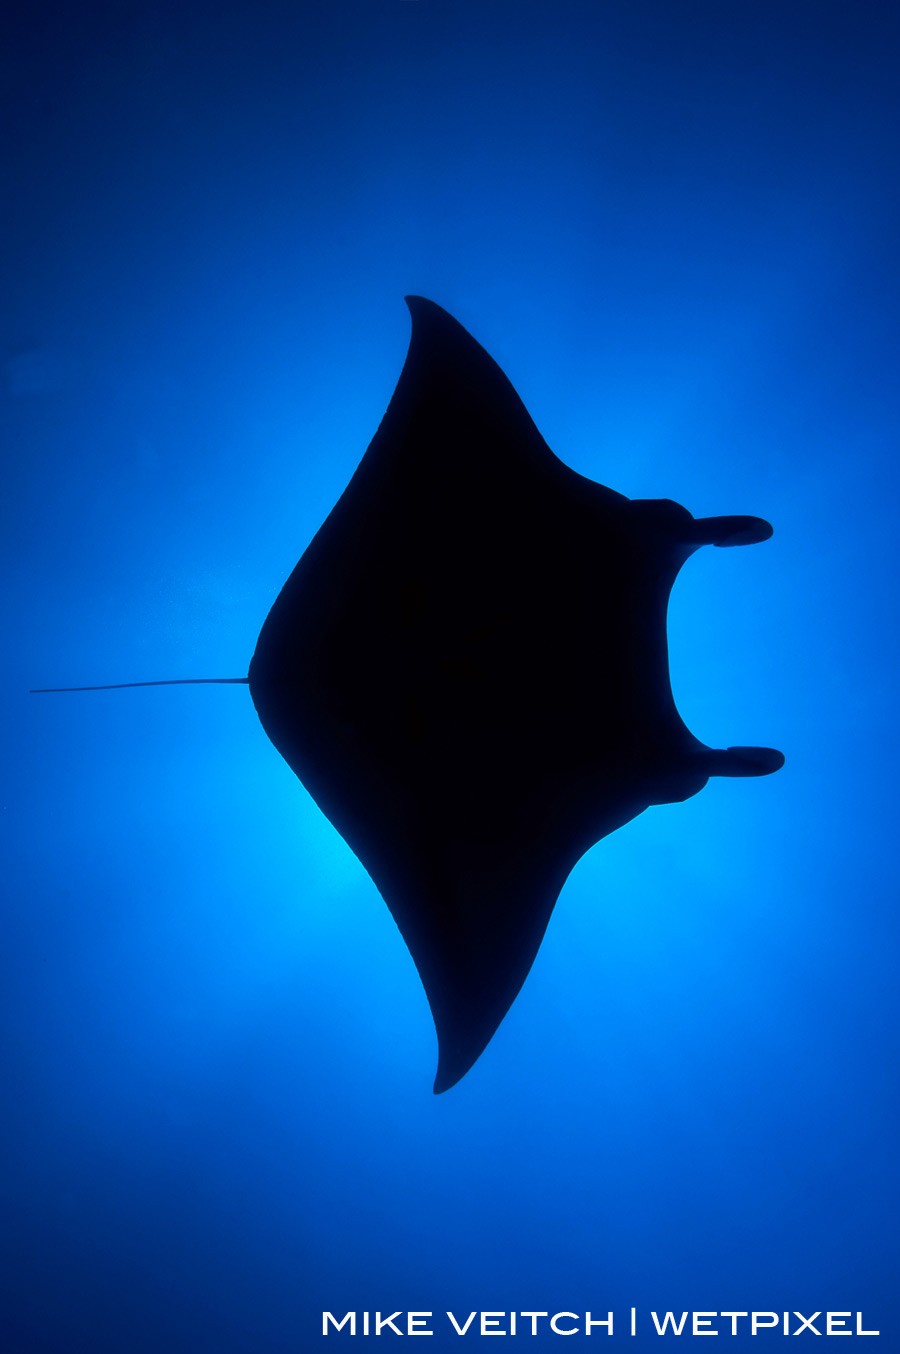 Manta ray in silhouette, *Manta birostris*, Valley of the Rays, Goofnuw Channel, Yap, Federated States of Micronesia, Pacific Ocean